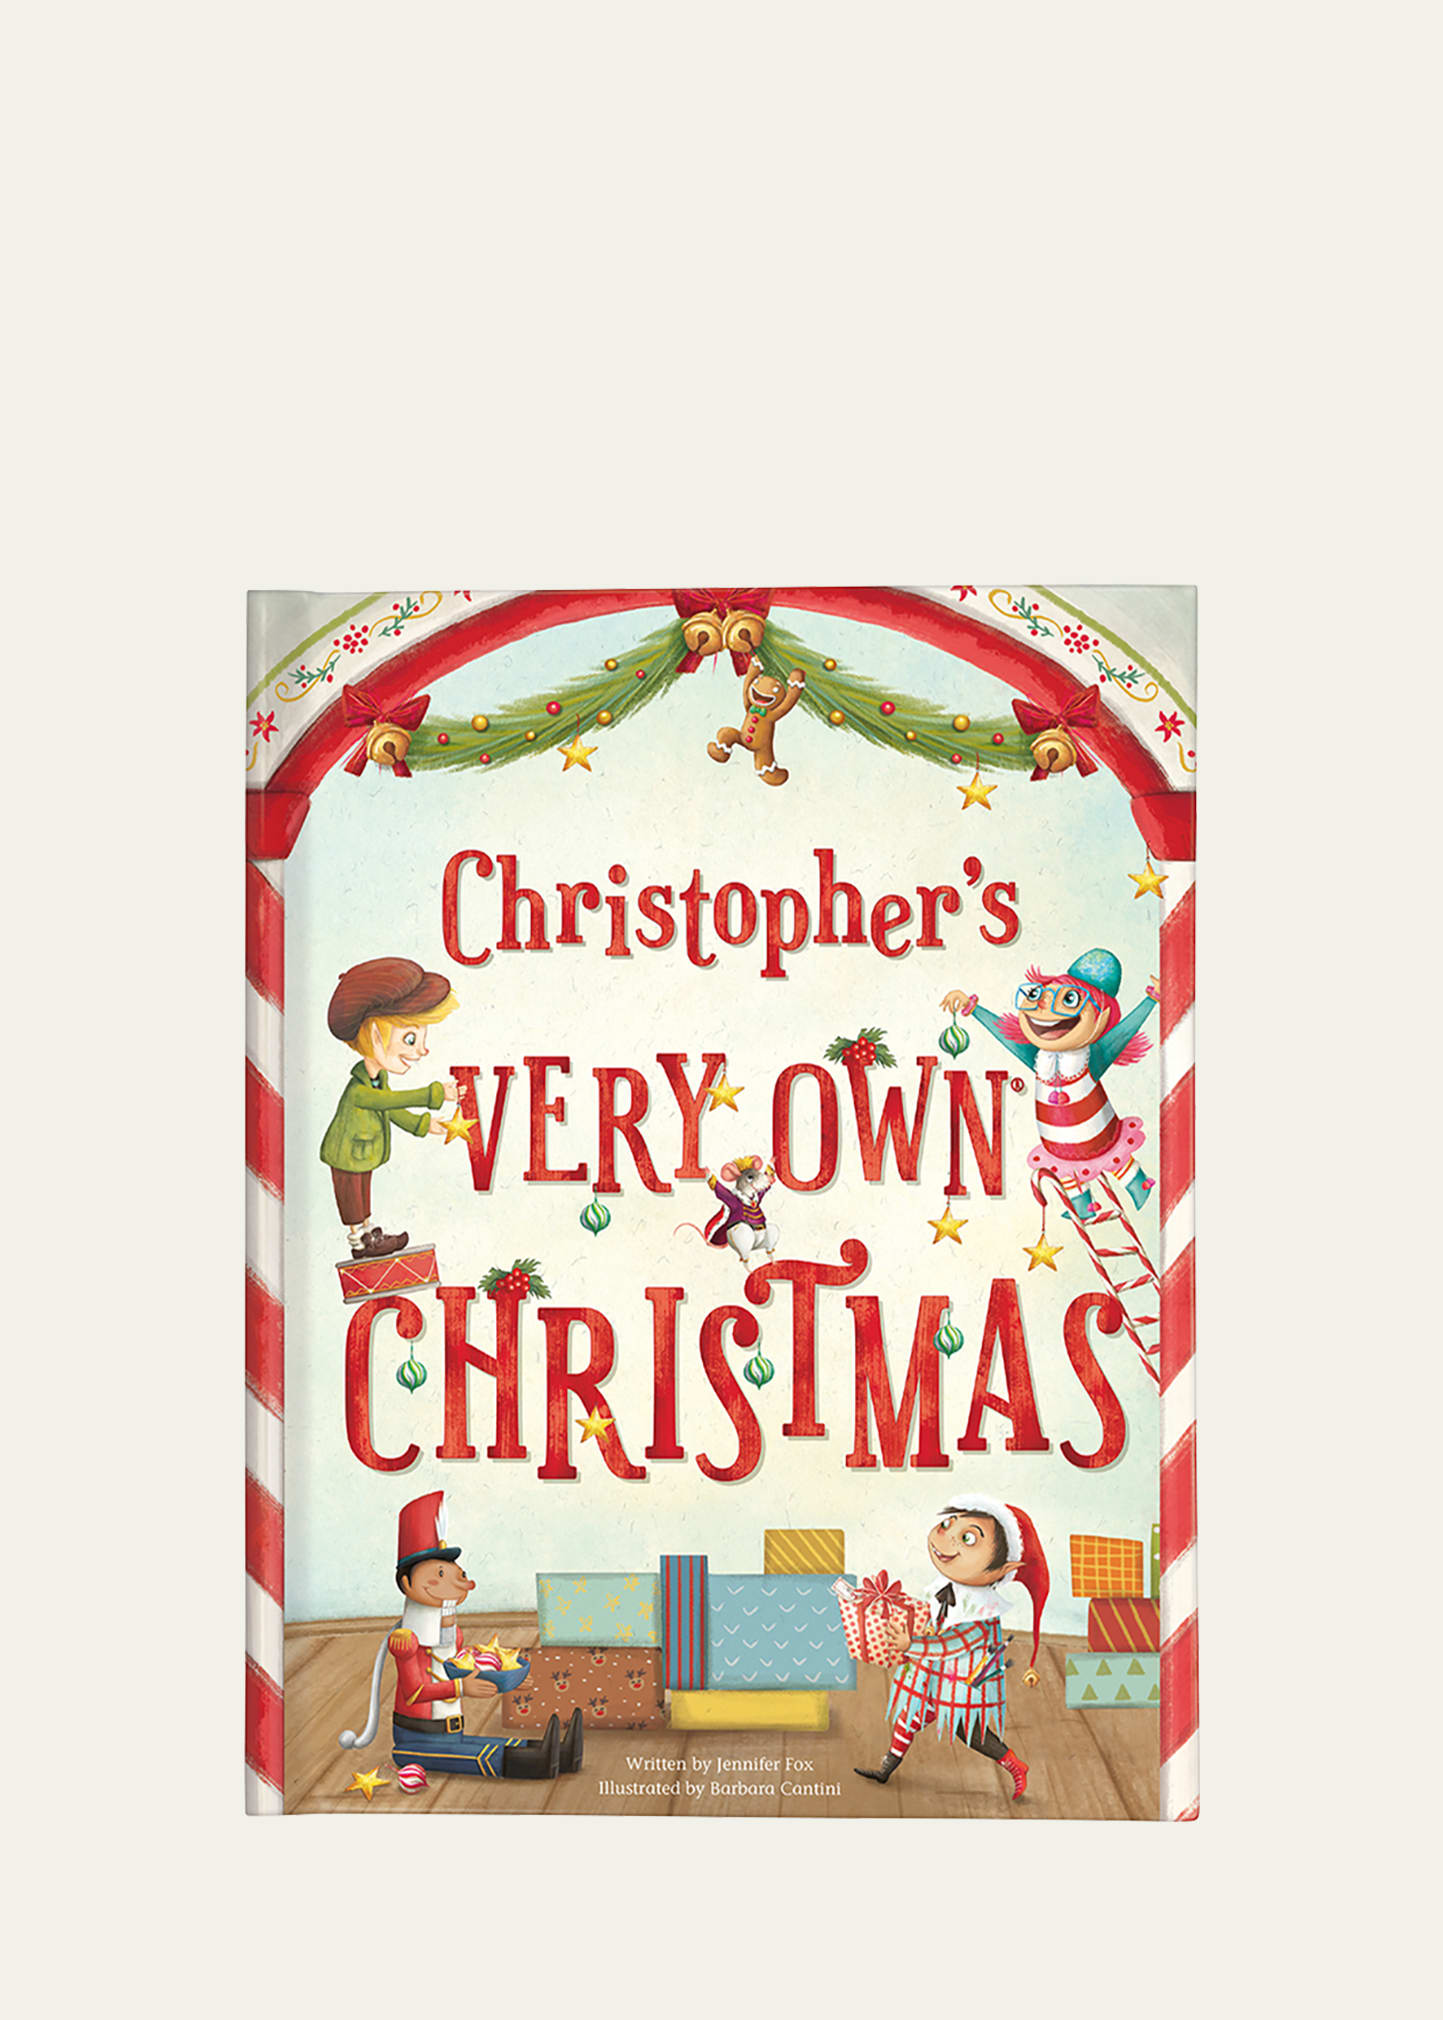 I See Me Kid's "My Very Own Christmas" Book